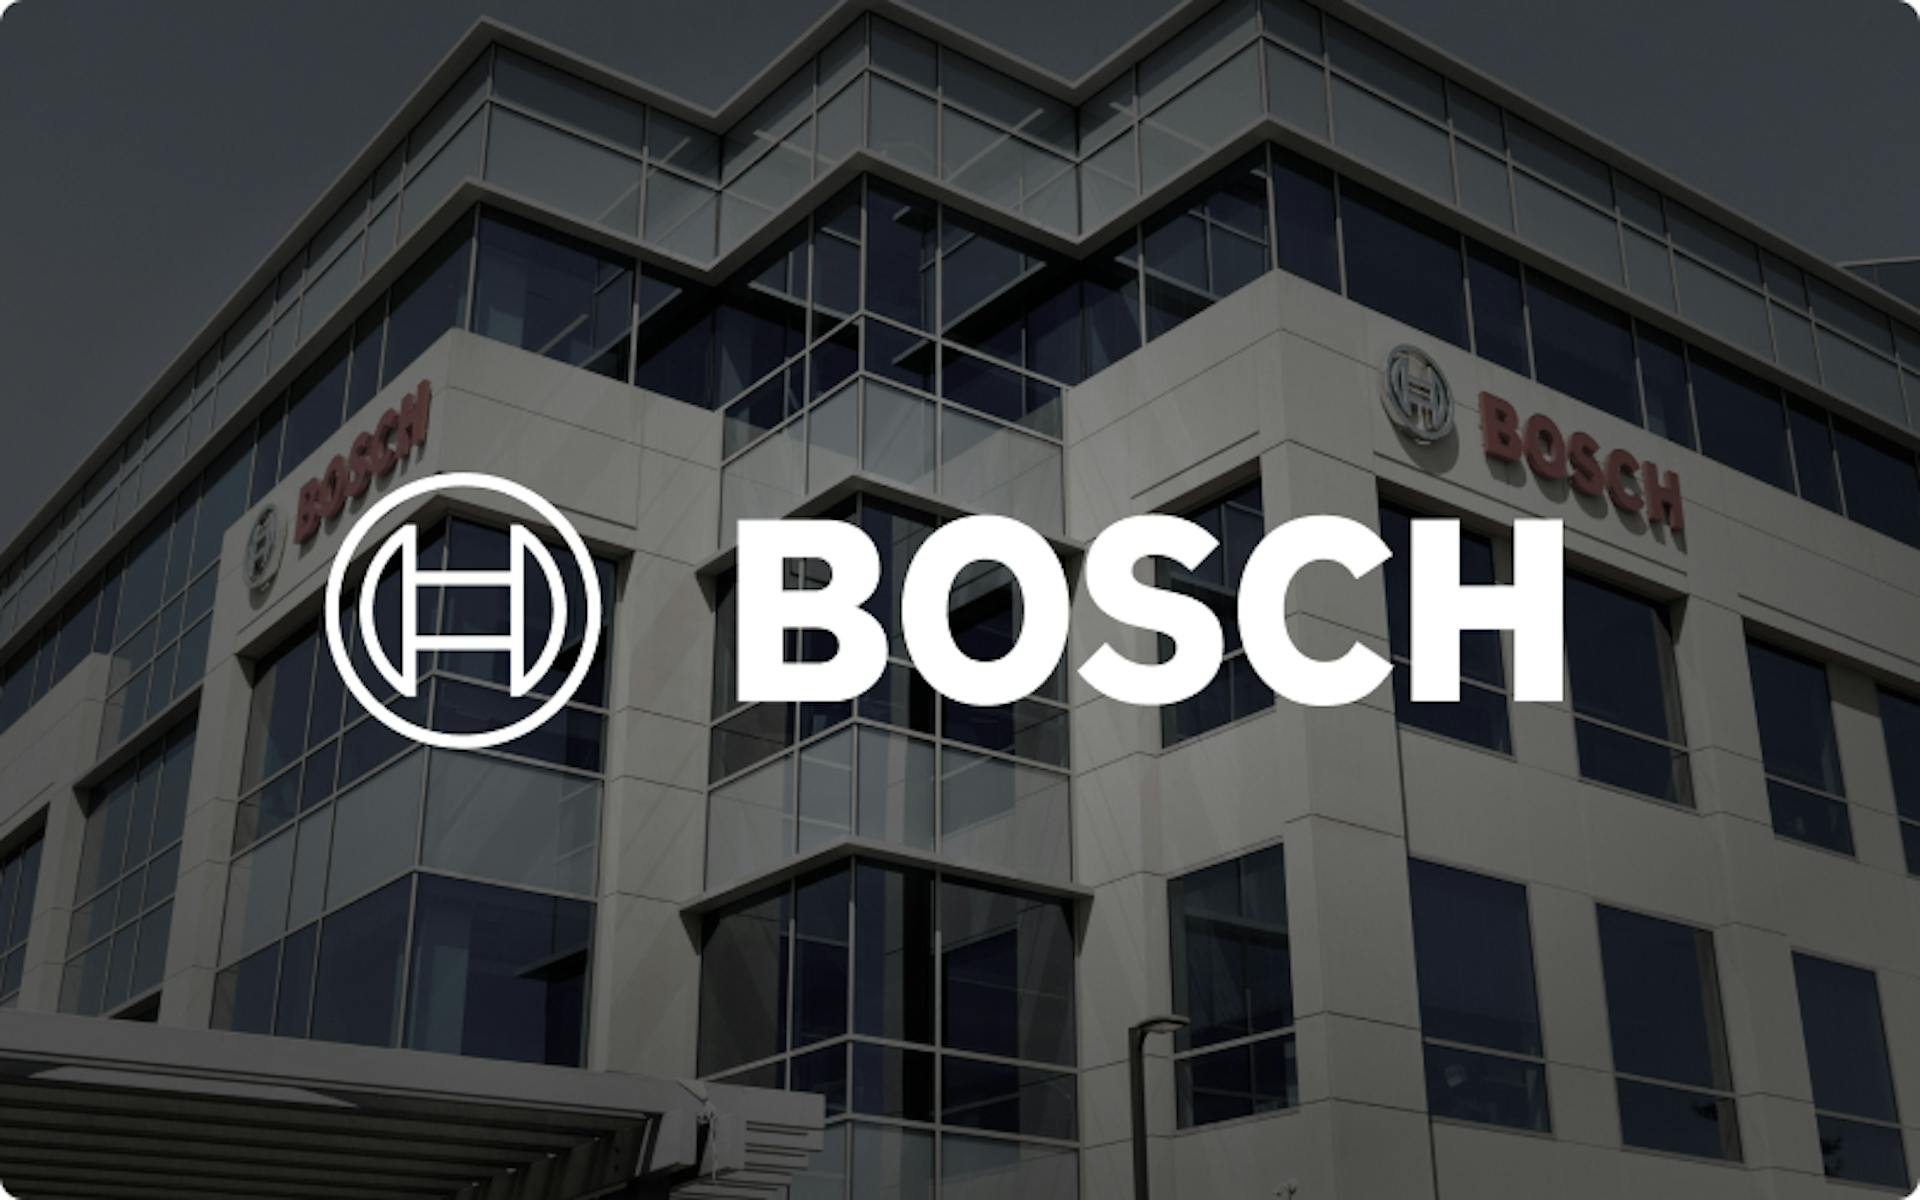 Bosch logo in white with a picture of the bosch offices in the background